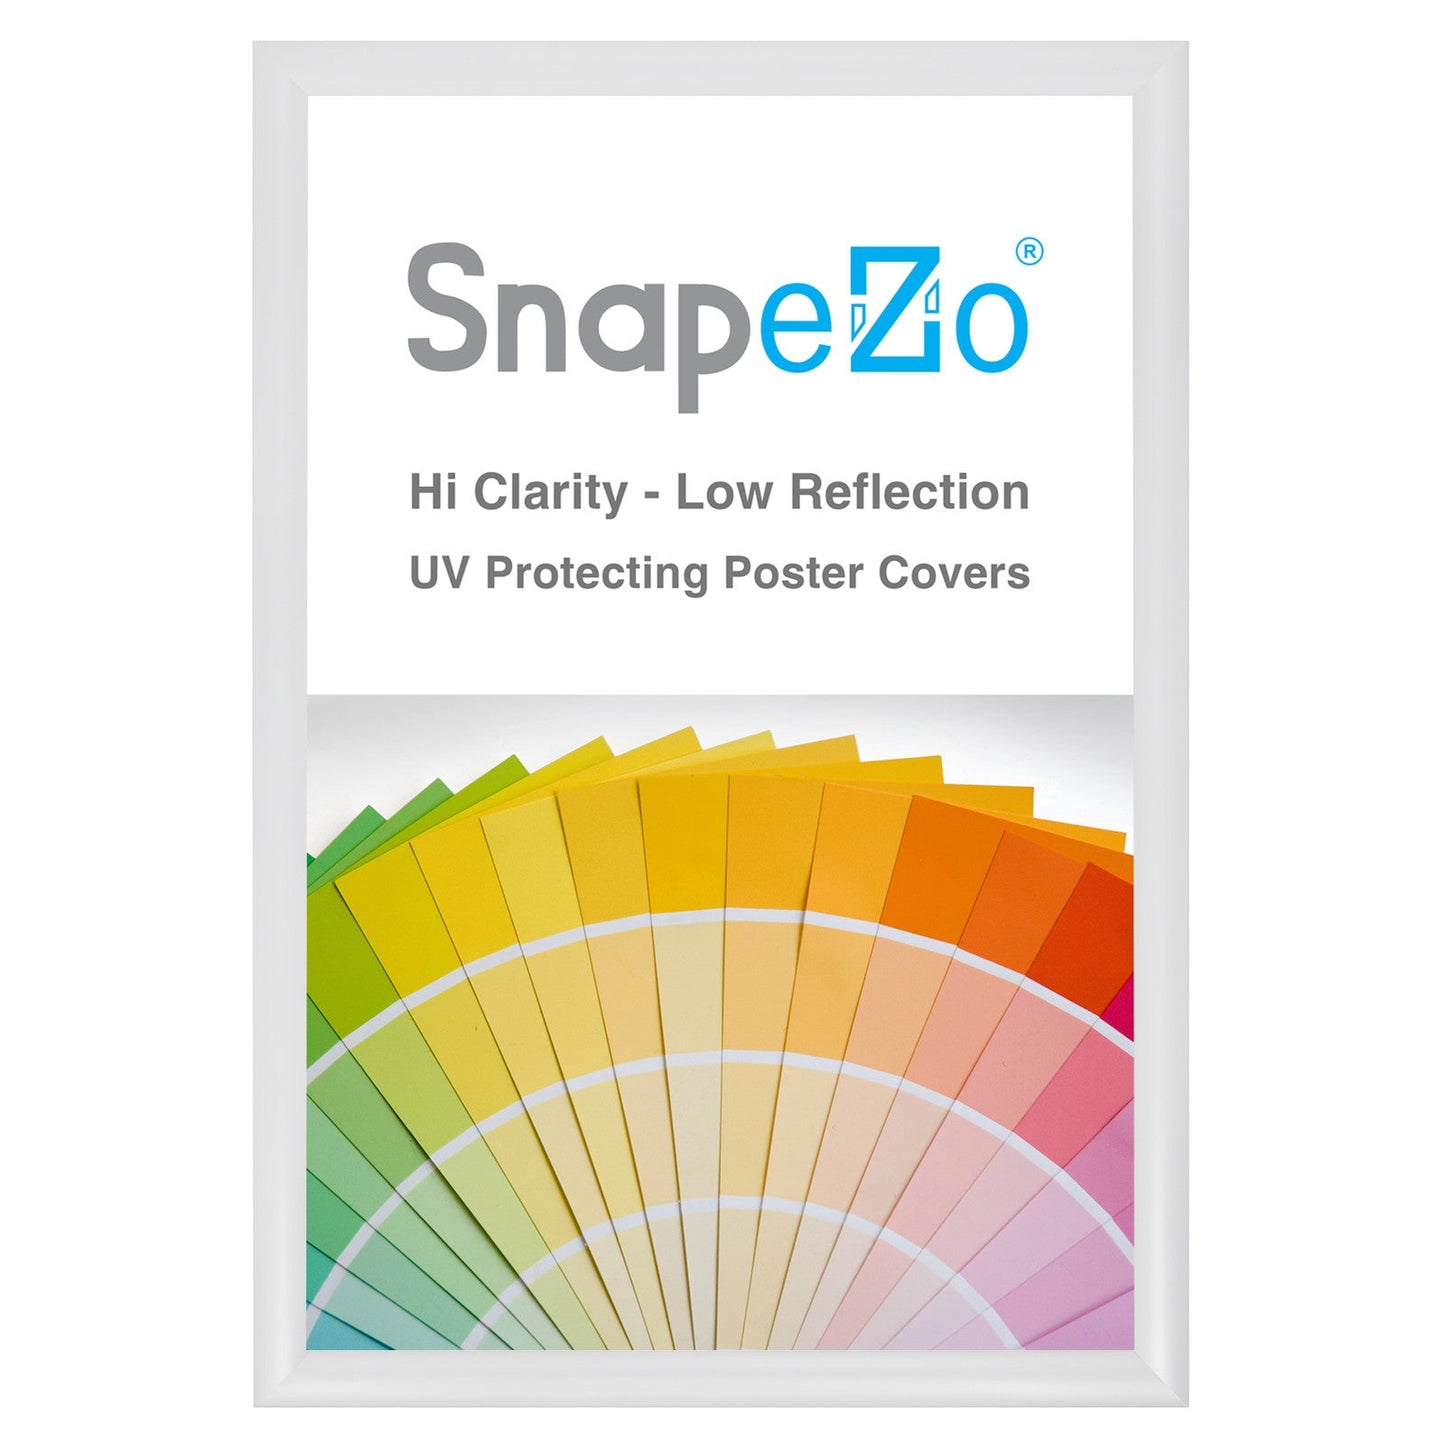 Load image into Gallery viewer, 13x19 White SnapeZo® Snap Frame - 1.2&amp;quot; Profile
